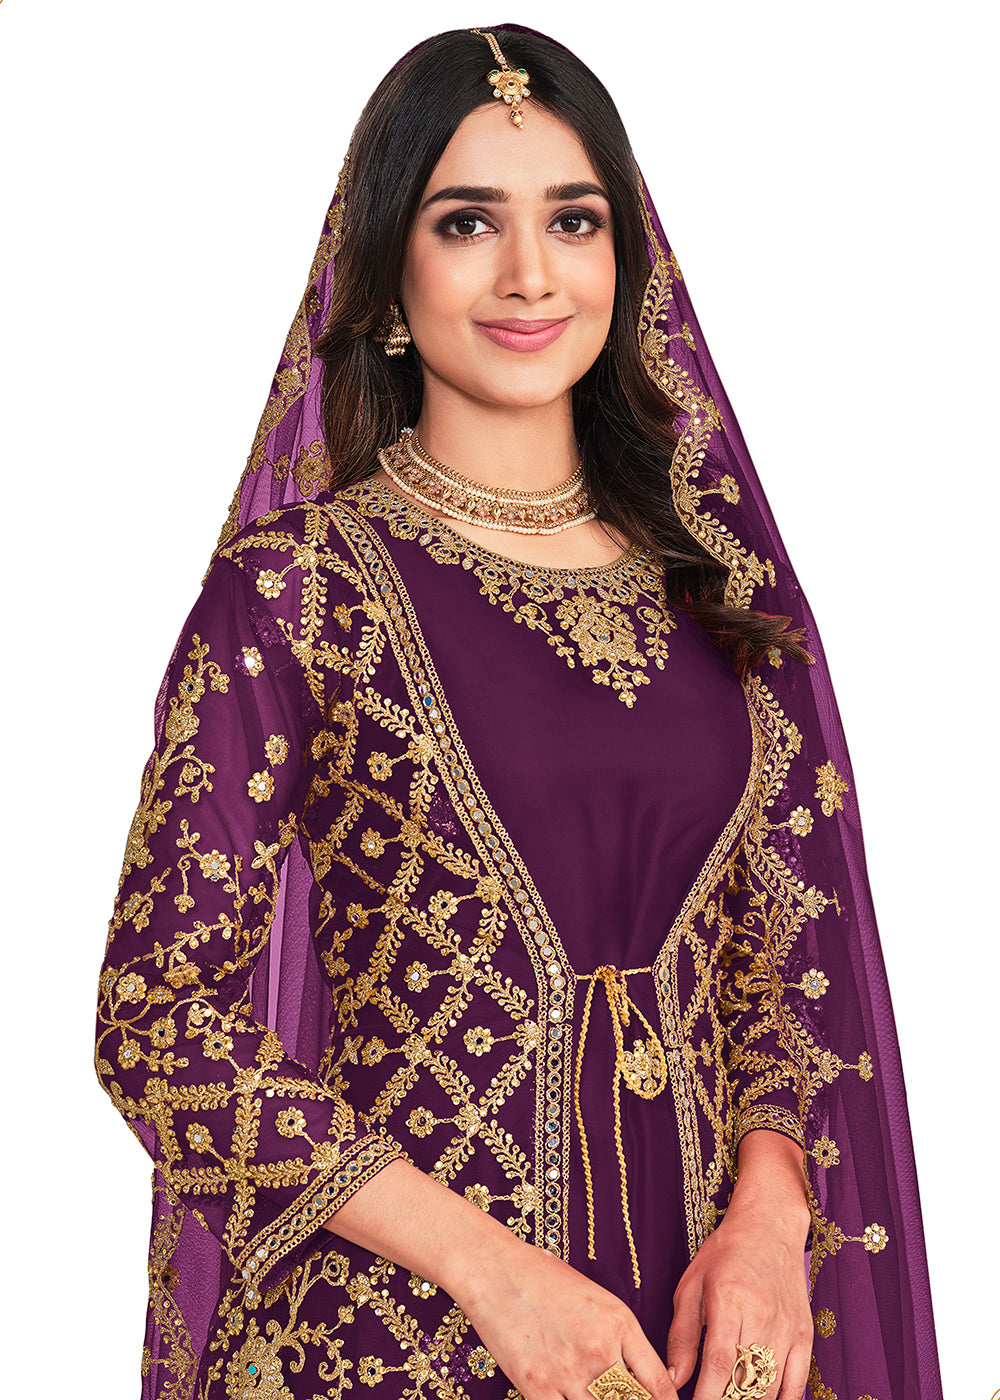 Buy Now Koti Style Lovely Purple Patterned Festive Salwar Suit Online in USA, UK, Canada, Germany, Australia & Worldwide at Empress Clothing. 